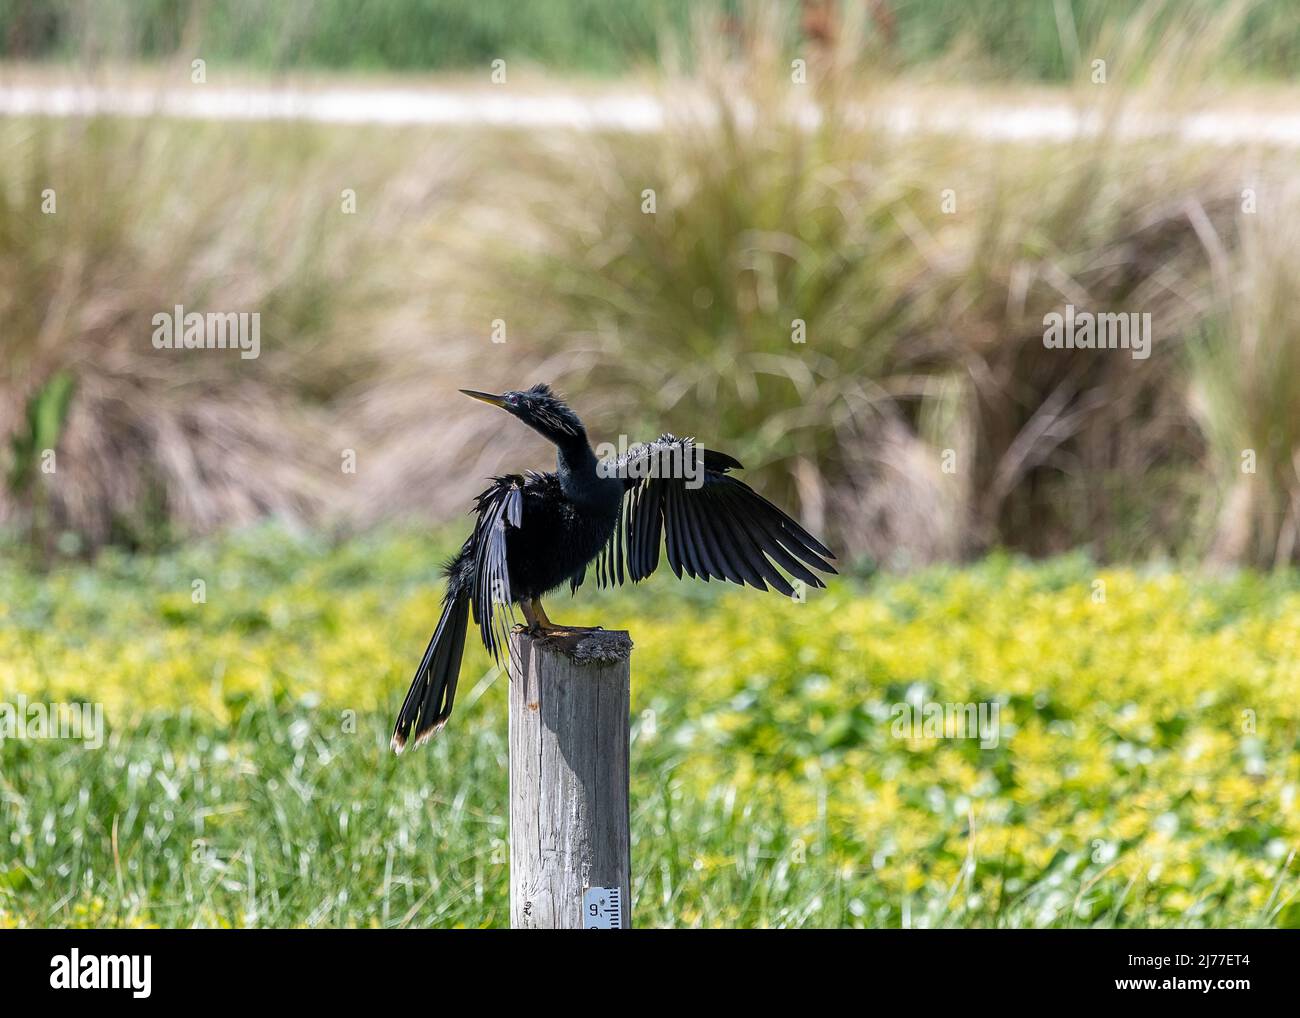 Male adult Anhingas are black waterbirds that are often seen drying their wings perched along marshes, rivers, ponds and any other fresh water source Stock Photo